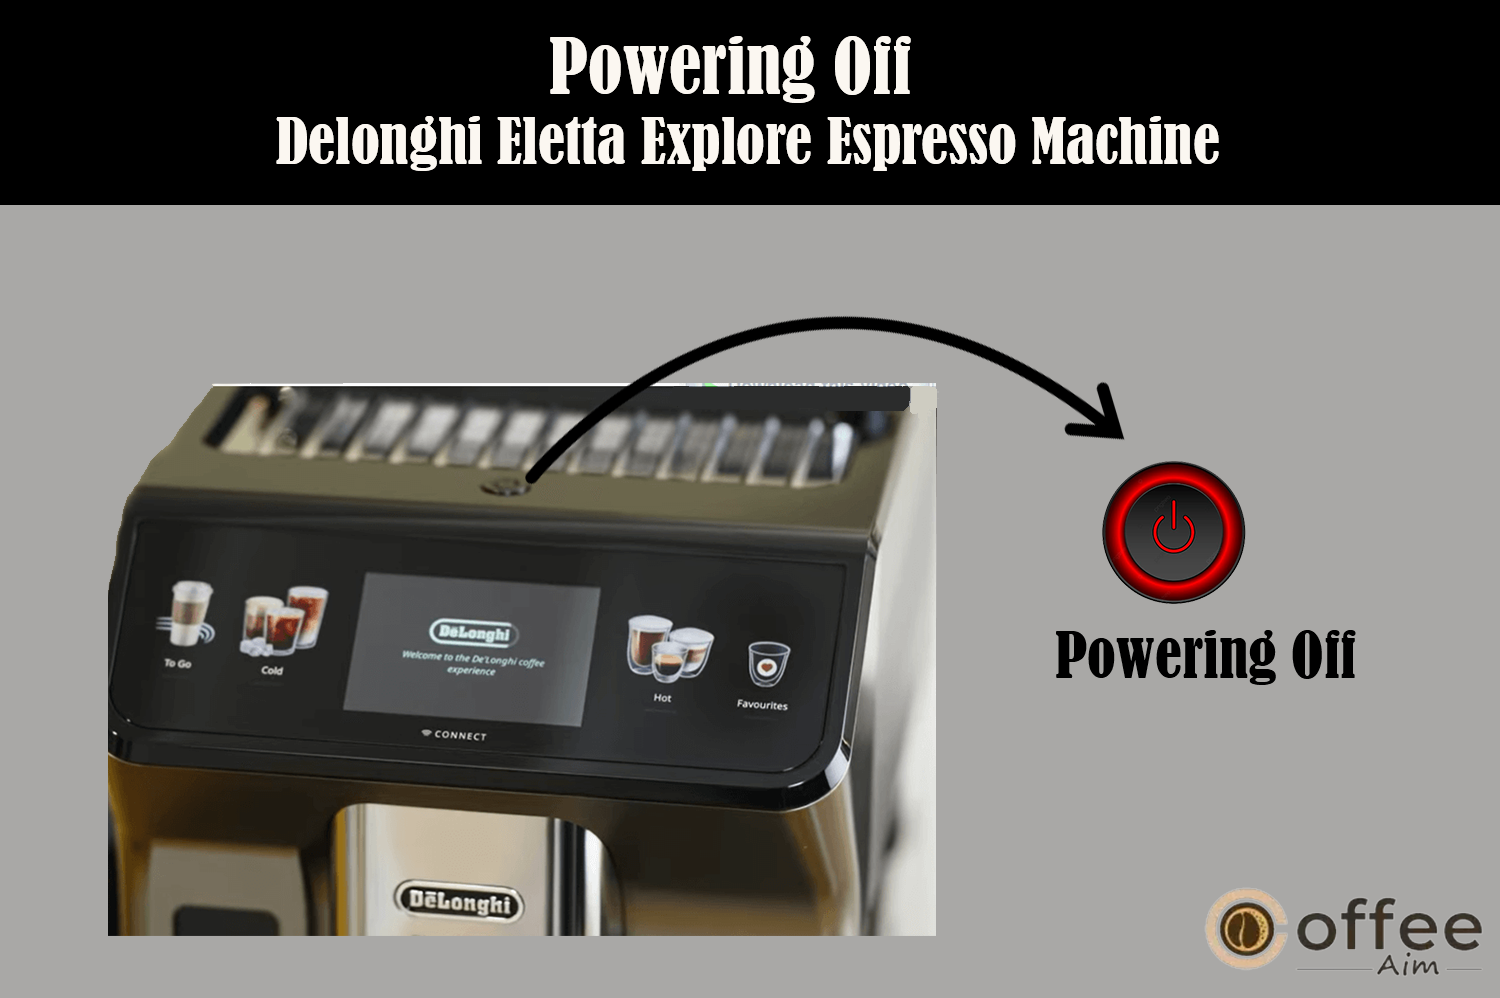 This image illustrates the correct procedure for safely turning off the De'Longhi Eletta Explore Espresso Machine, as detailed in the article 'How to Use the De'Longhi Eletta Explore Espresso Machine'.